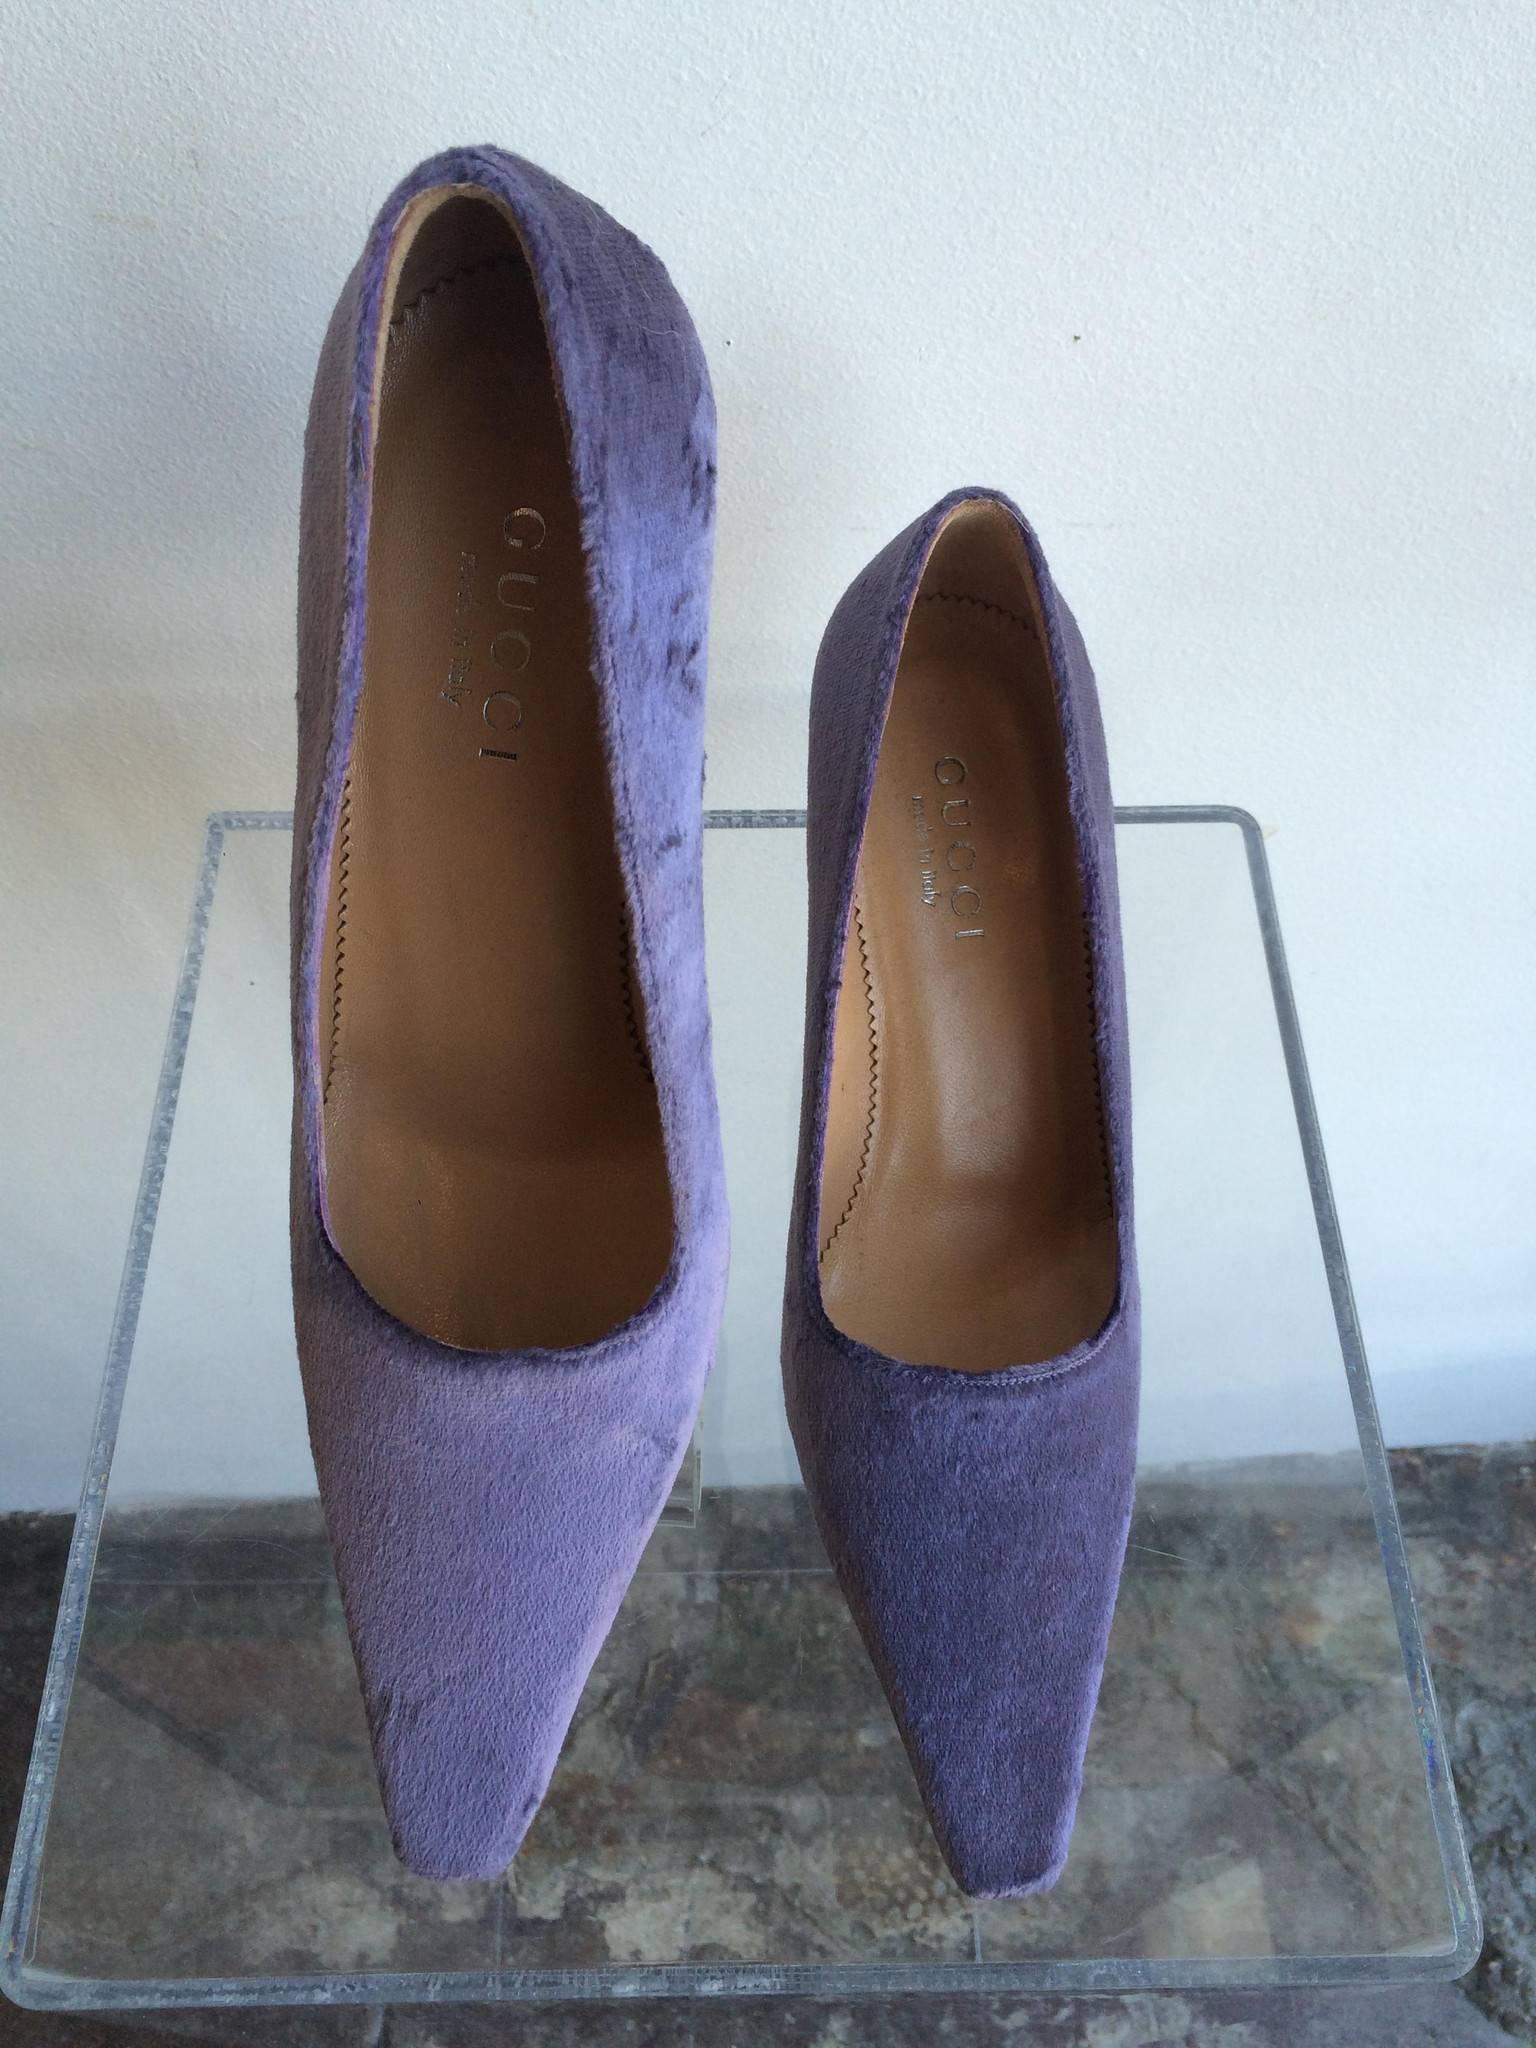 Gucci Lavender Velvet pointed toe Pumps with square tips.

Heel Height: 3 inches
Size Marked:  7B

New never used Condition: Please remember all clothes are previously owned and gently worn unless otherwise noted.